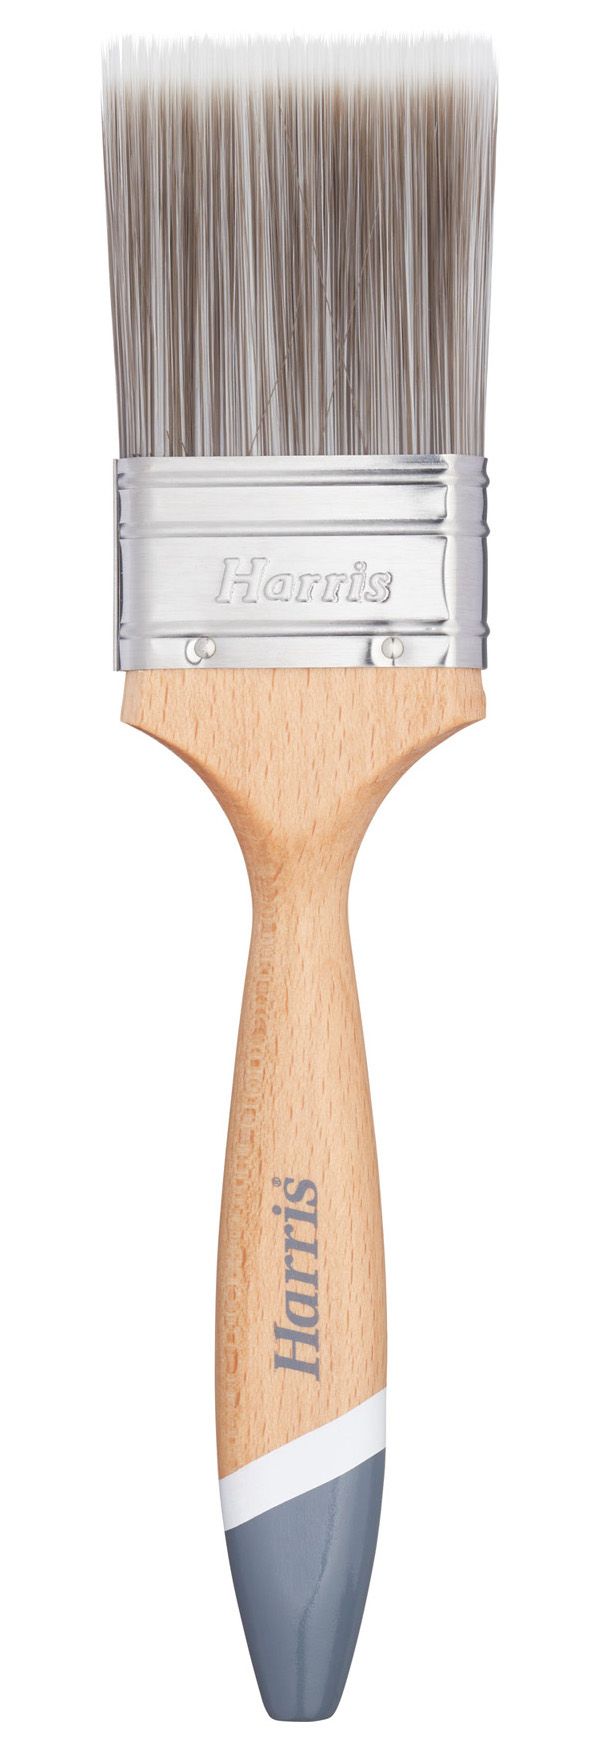 Harris Ultimate Wall & Ceiling Paint Brush - 2in